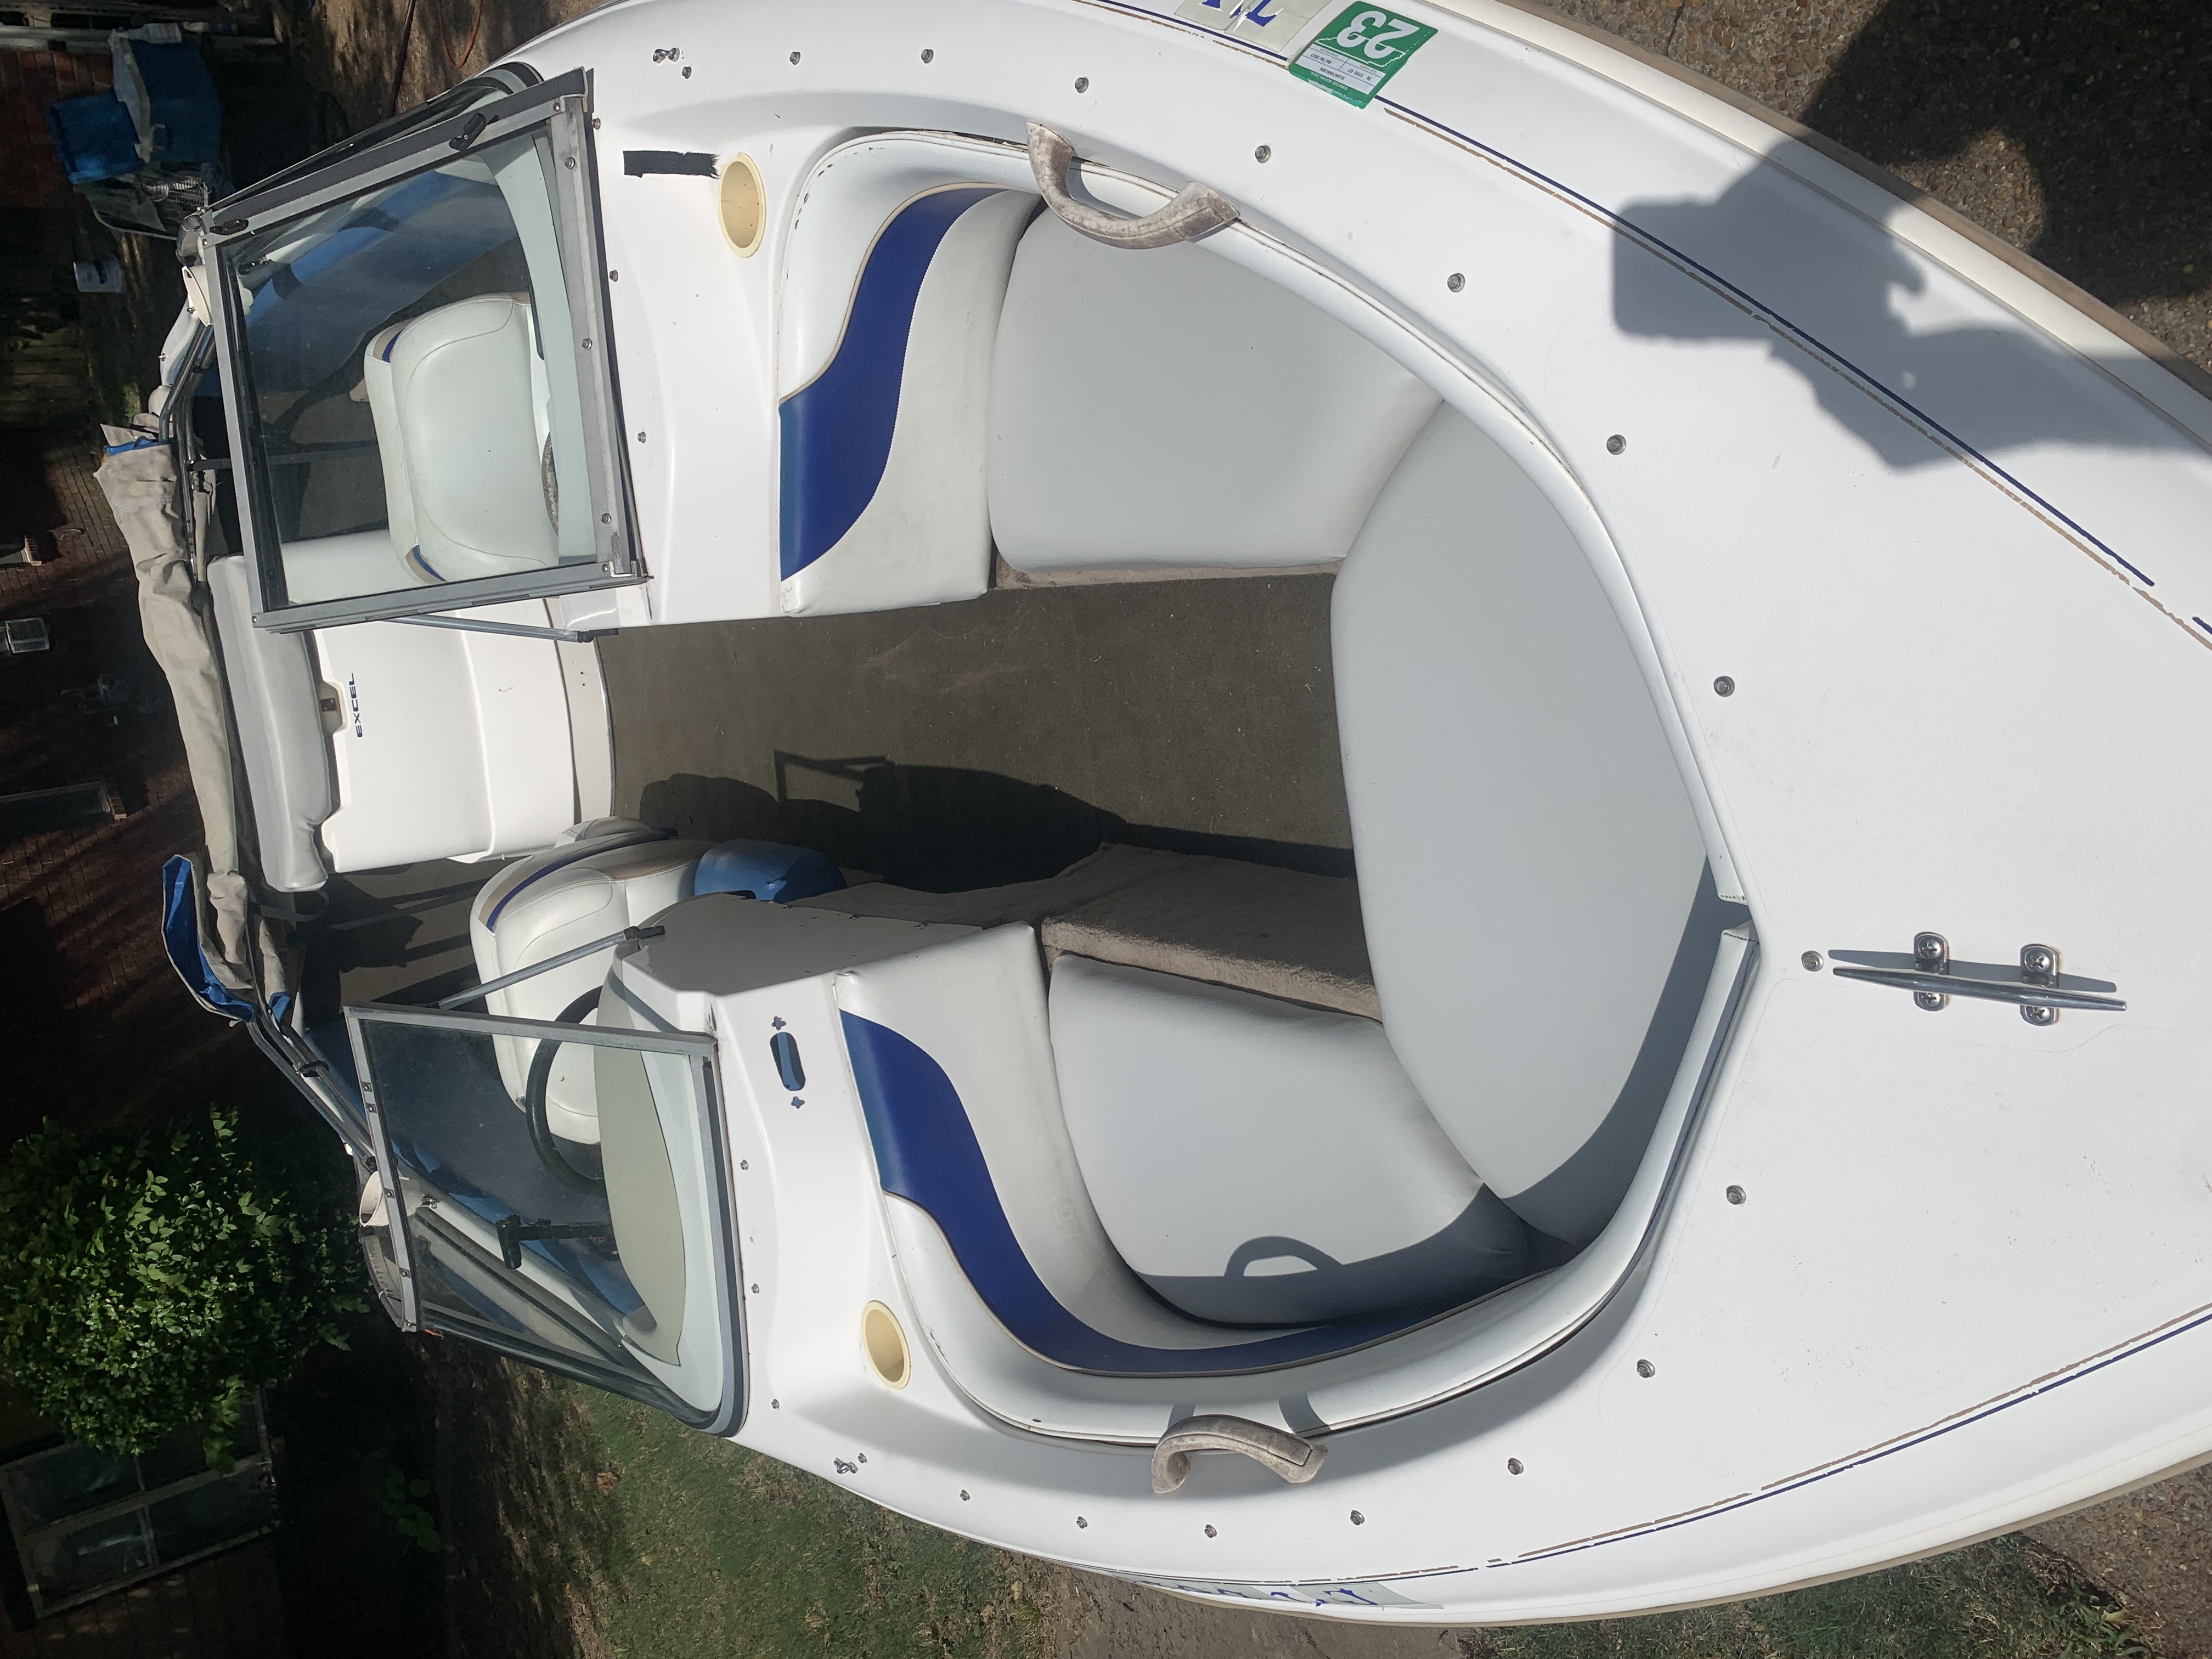 1996 Wellcraft Excel 19sx  Power boat for sale in Bartlett, TN - image 20 